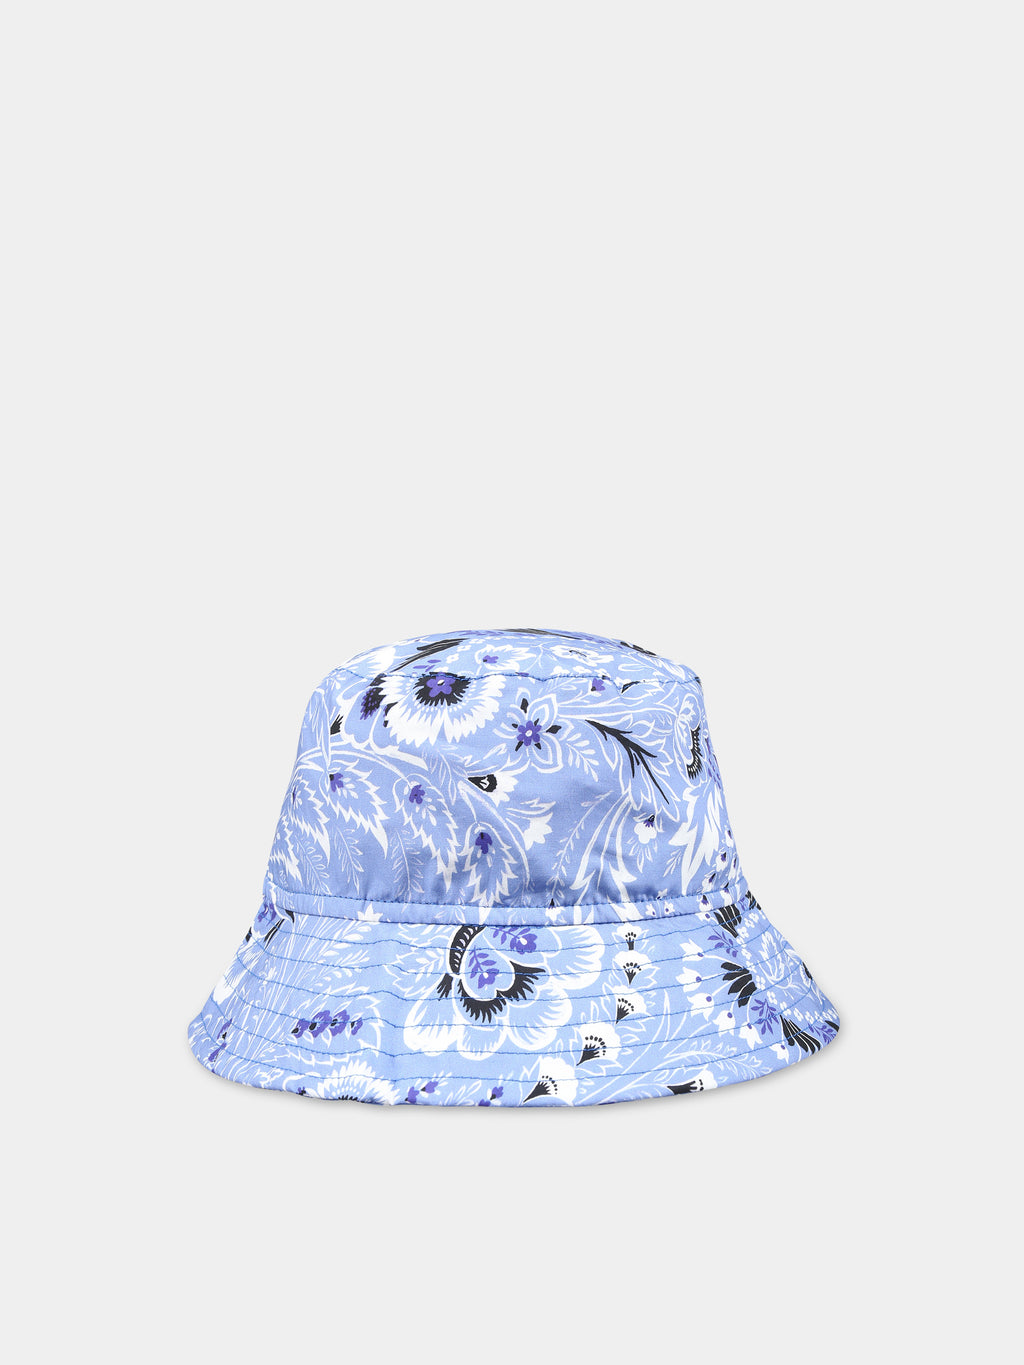 Sky blue cloche for kids with paisley motif